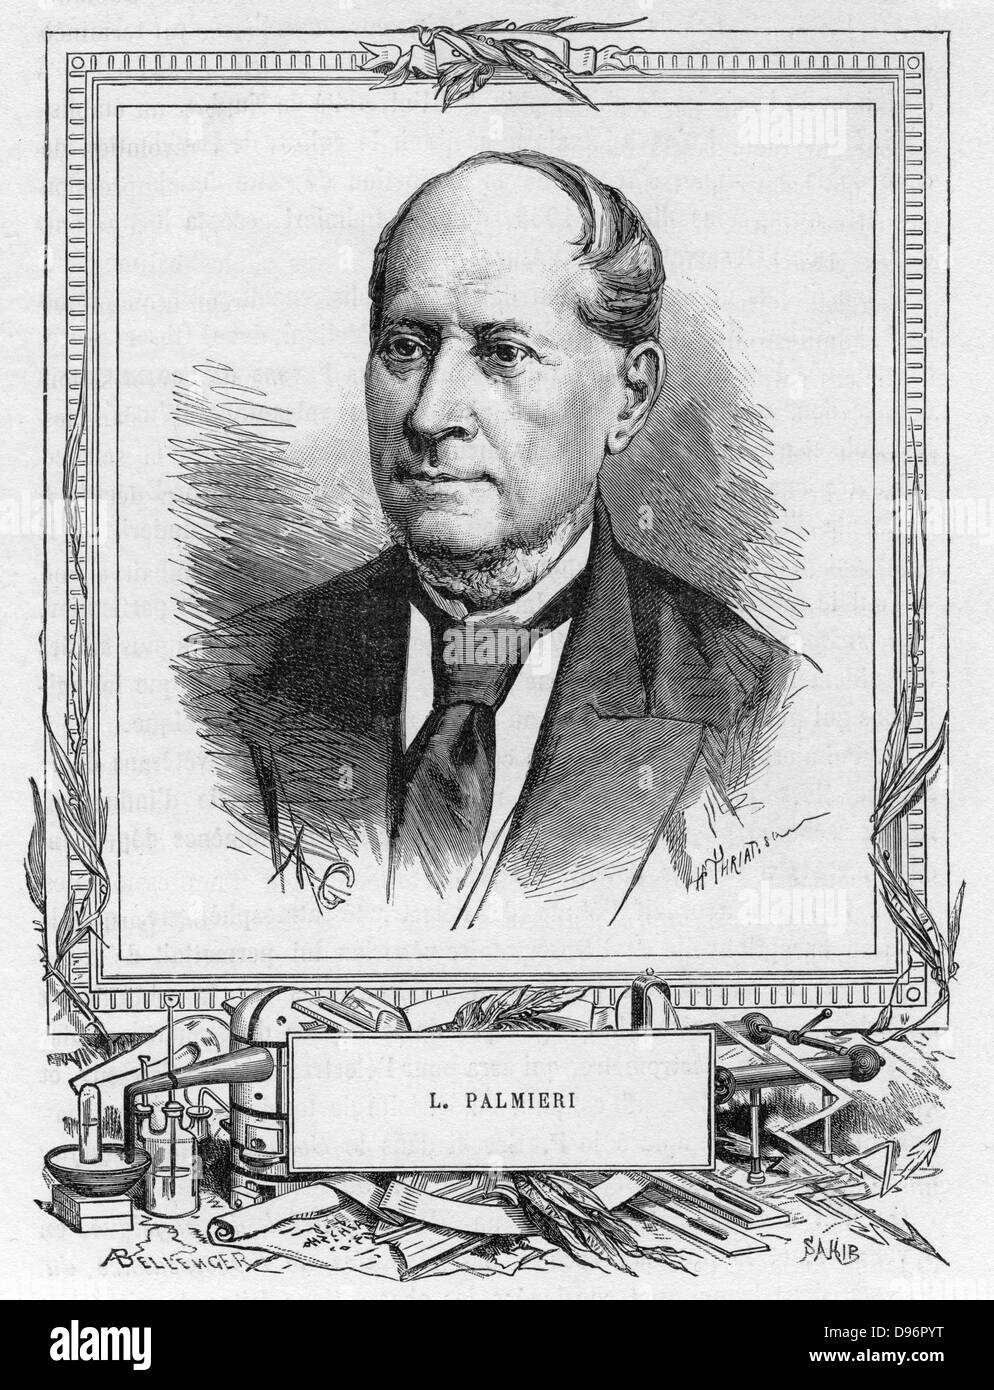 Luigi Palmieri (1807-1896), Italian geophysicist.   Palimieri was director of the Vesuvius Observatory which monitored the activity of the volcano.   In 1855 he invented a seismograph.  From 'Les Nouvelles Conquetes de la Science' by Louis Figuier, Paris, c1893. Stock Photo